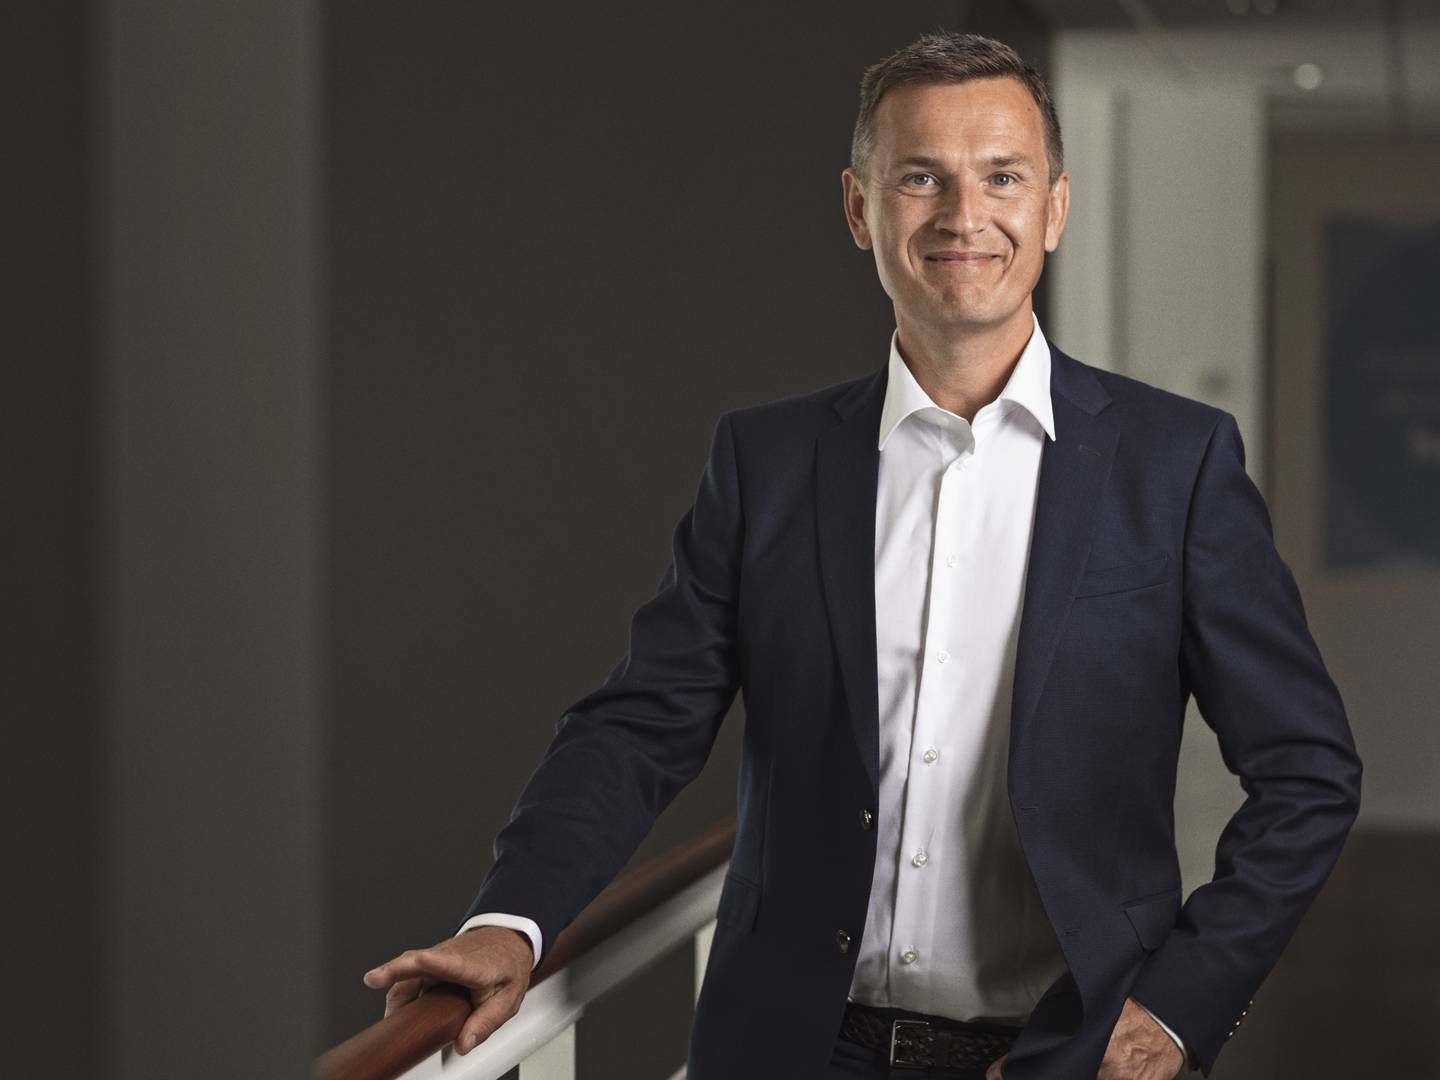 Anders Schelde, chief investment officer at Akademikerpension. | Photo: PR/MP Pension